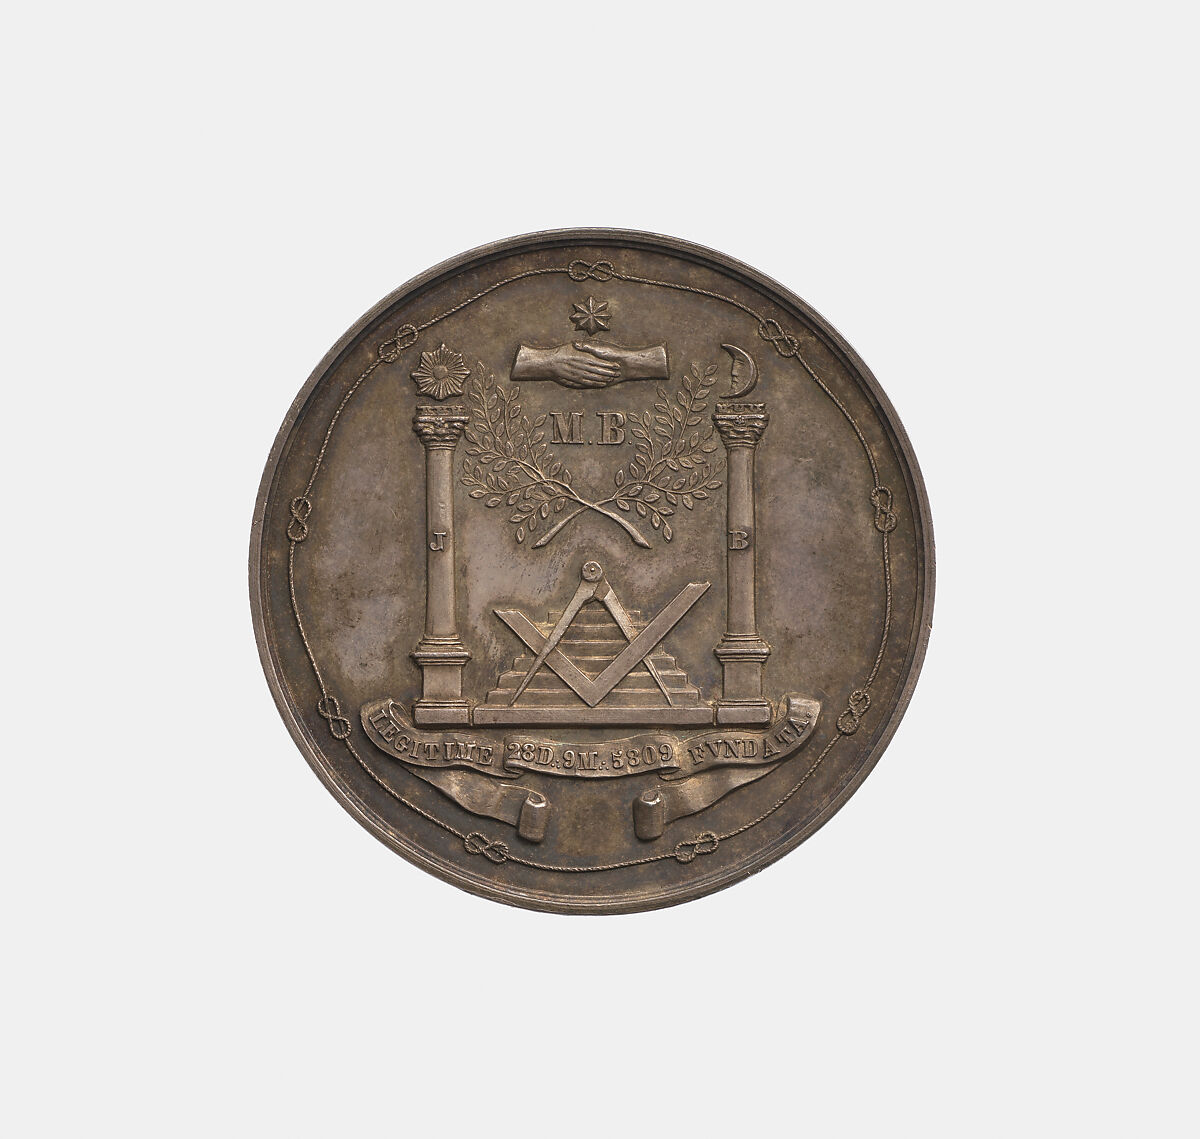 Masonic Medal commemorating the 10th anniversary of the lodge “Amicitia,” in the city of Soerabaya, Dutch East Indies (Indonesia), Unknown, Silver, Dutch, East Indies (Indonesia) 